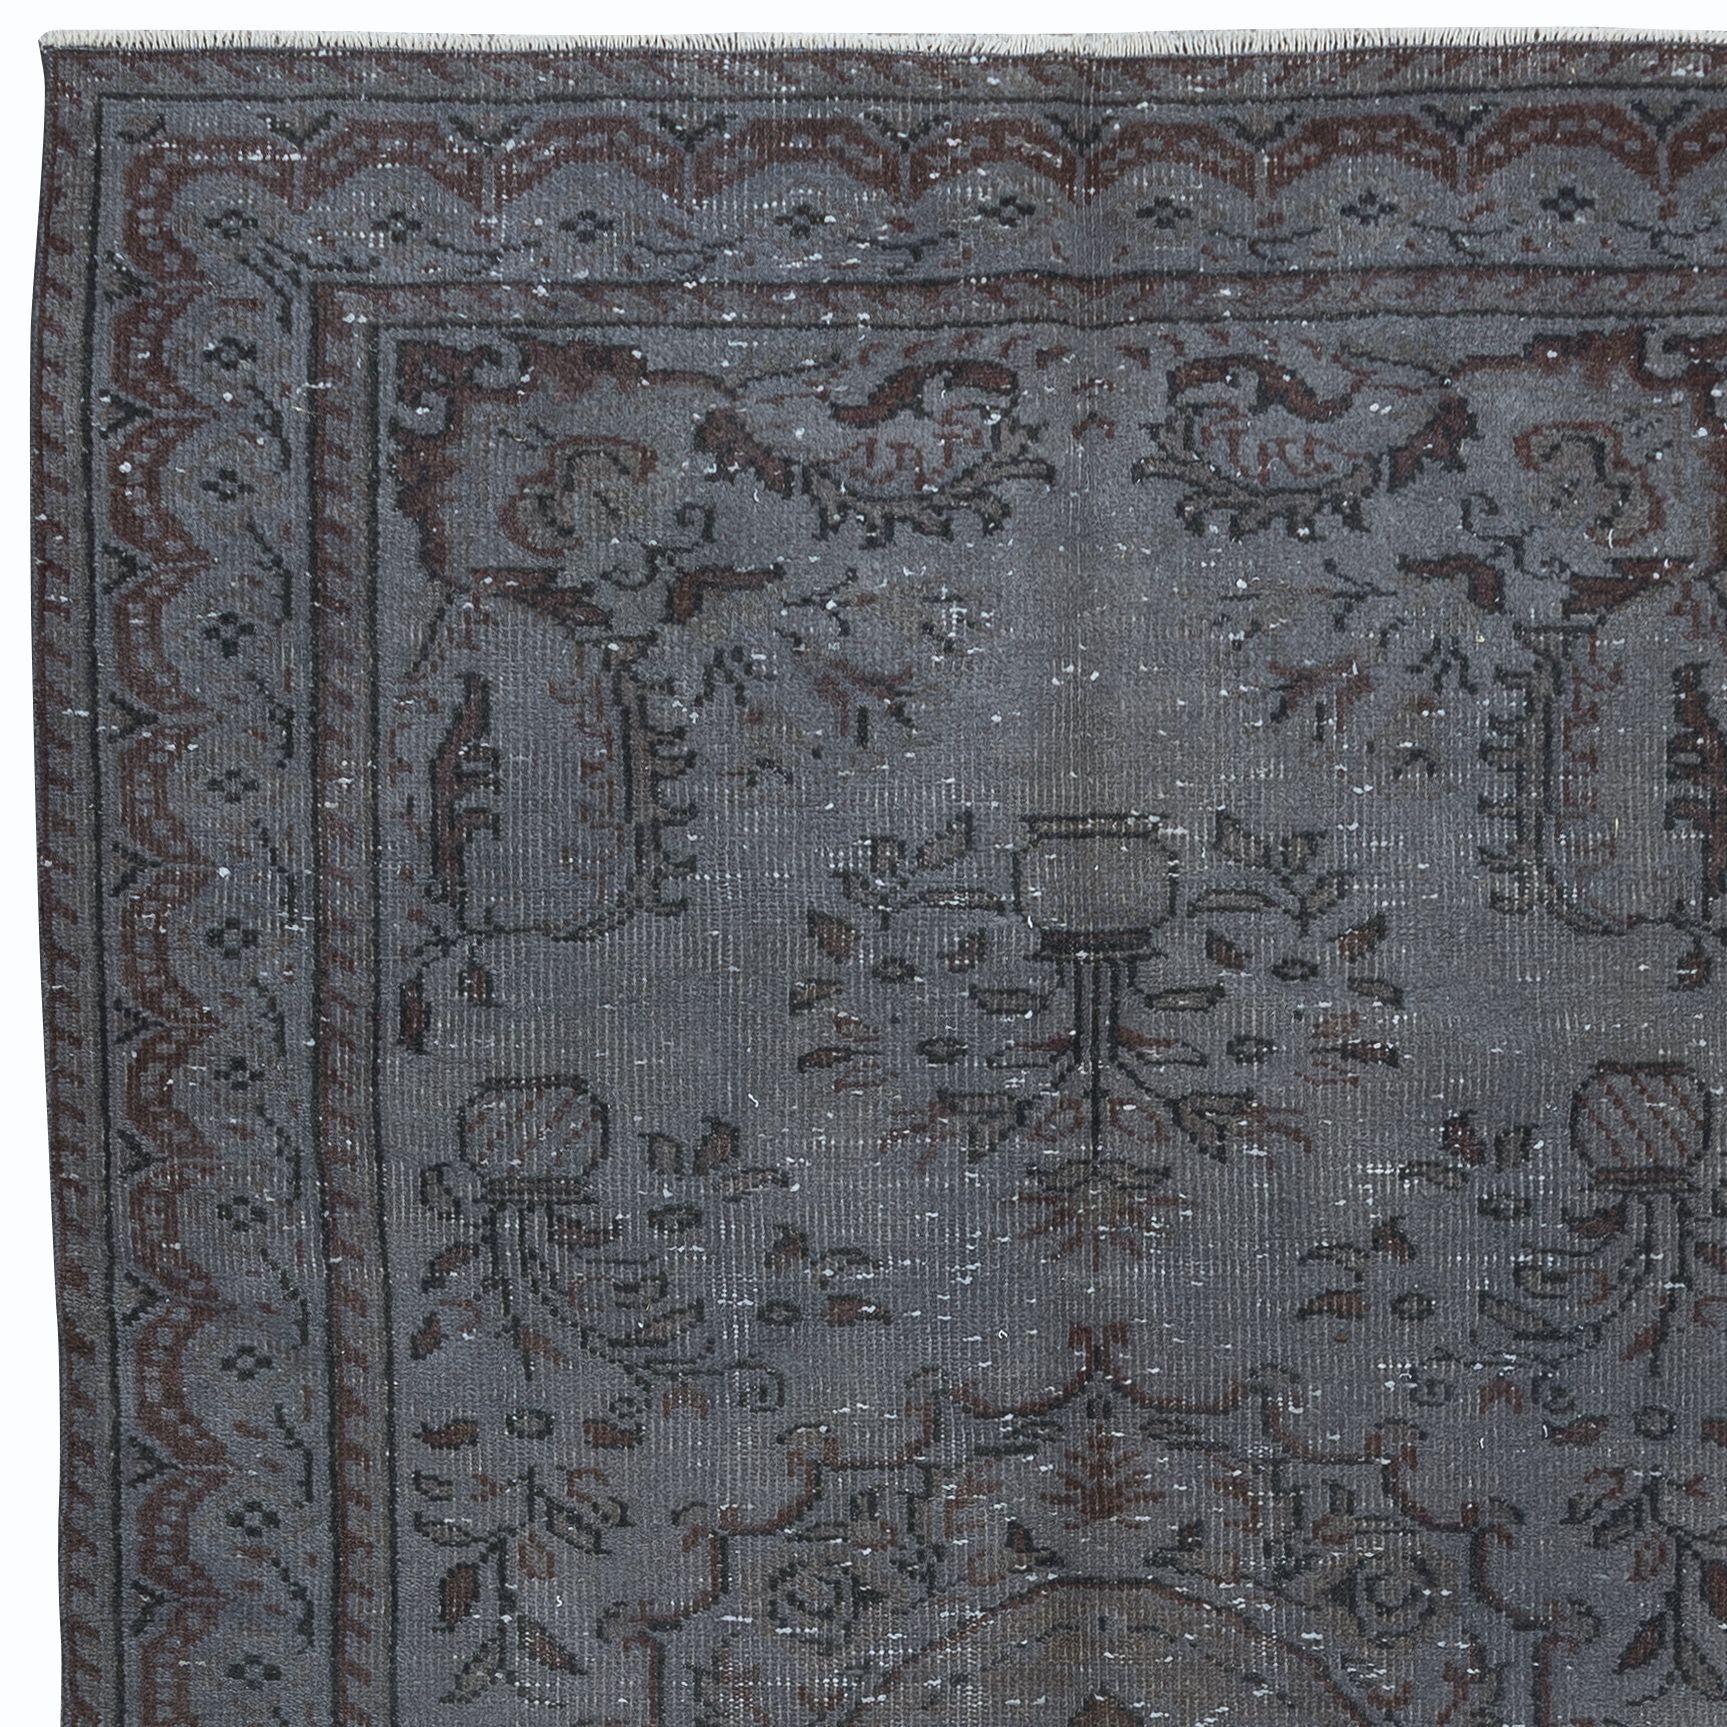 Hand-Woven 5.2x8.8 Ft Contemporary Handmade Turkish Wool Area Rug in Grey & Brown Tones For Sale